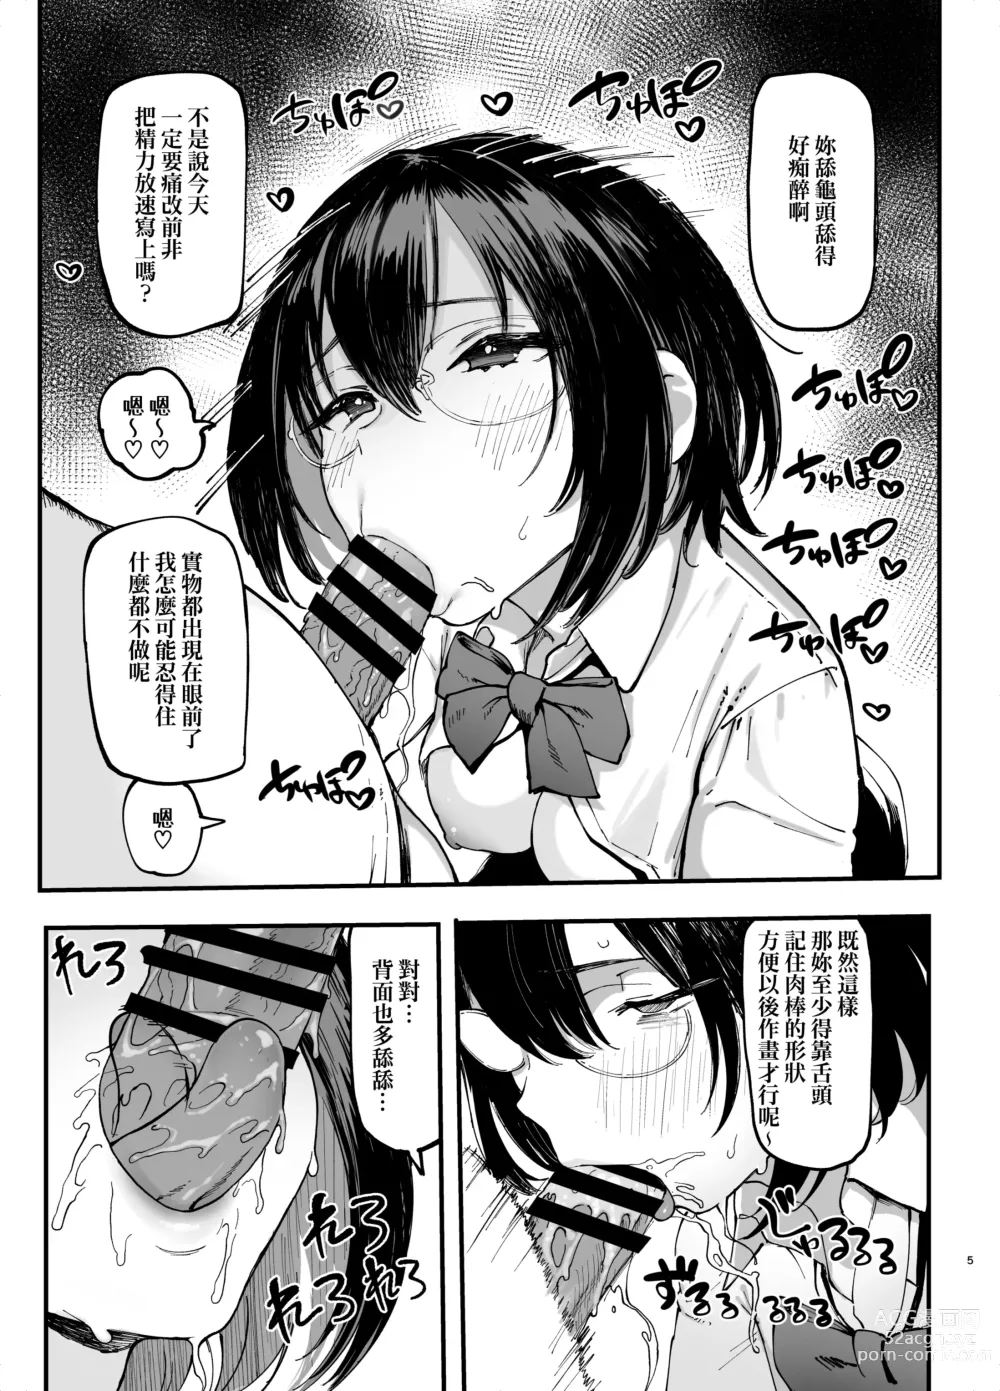 Page 5 of doujinshi OeAe